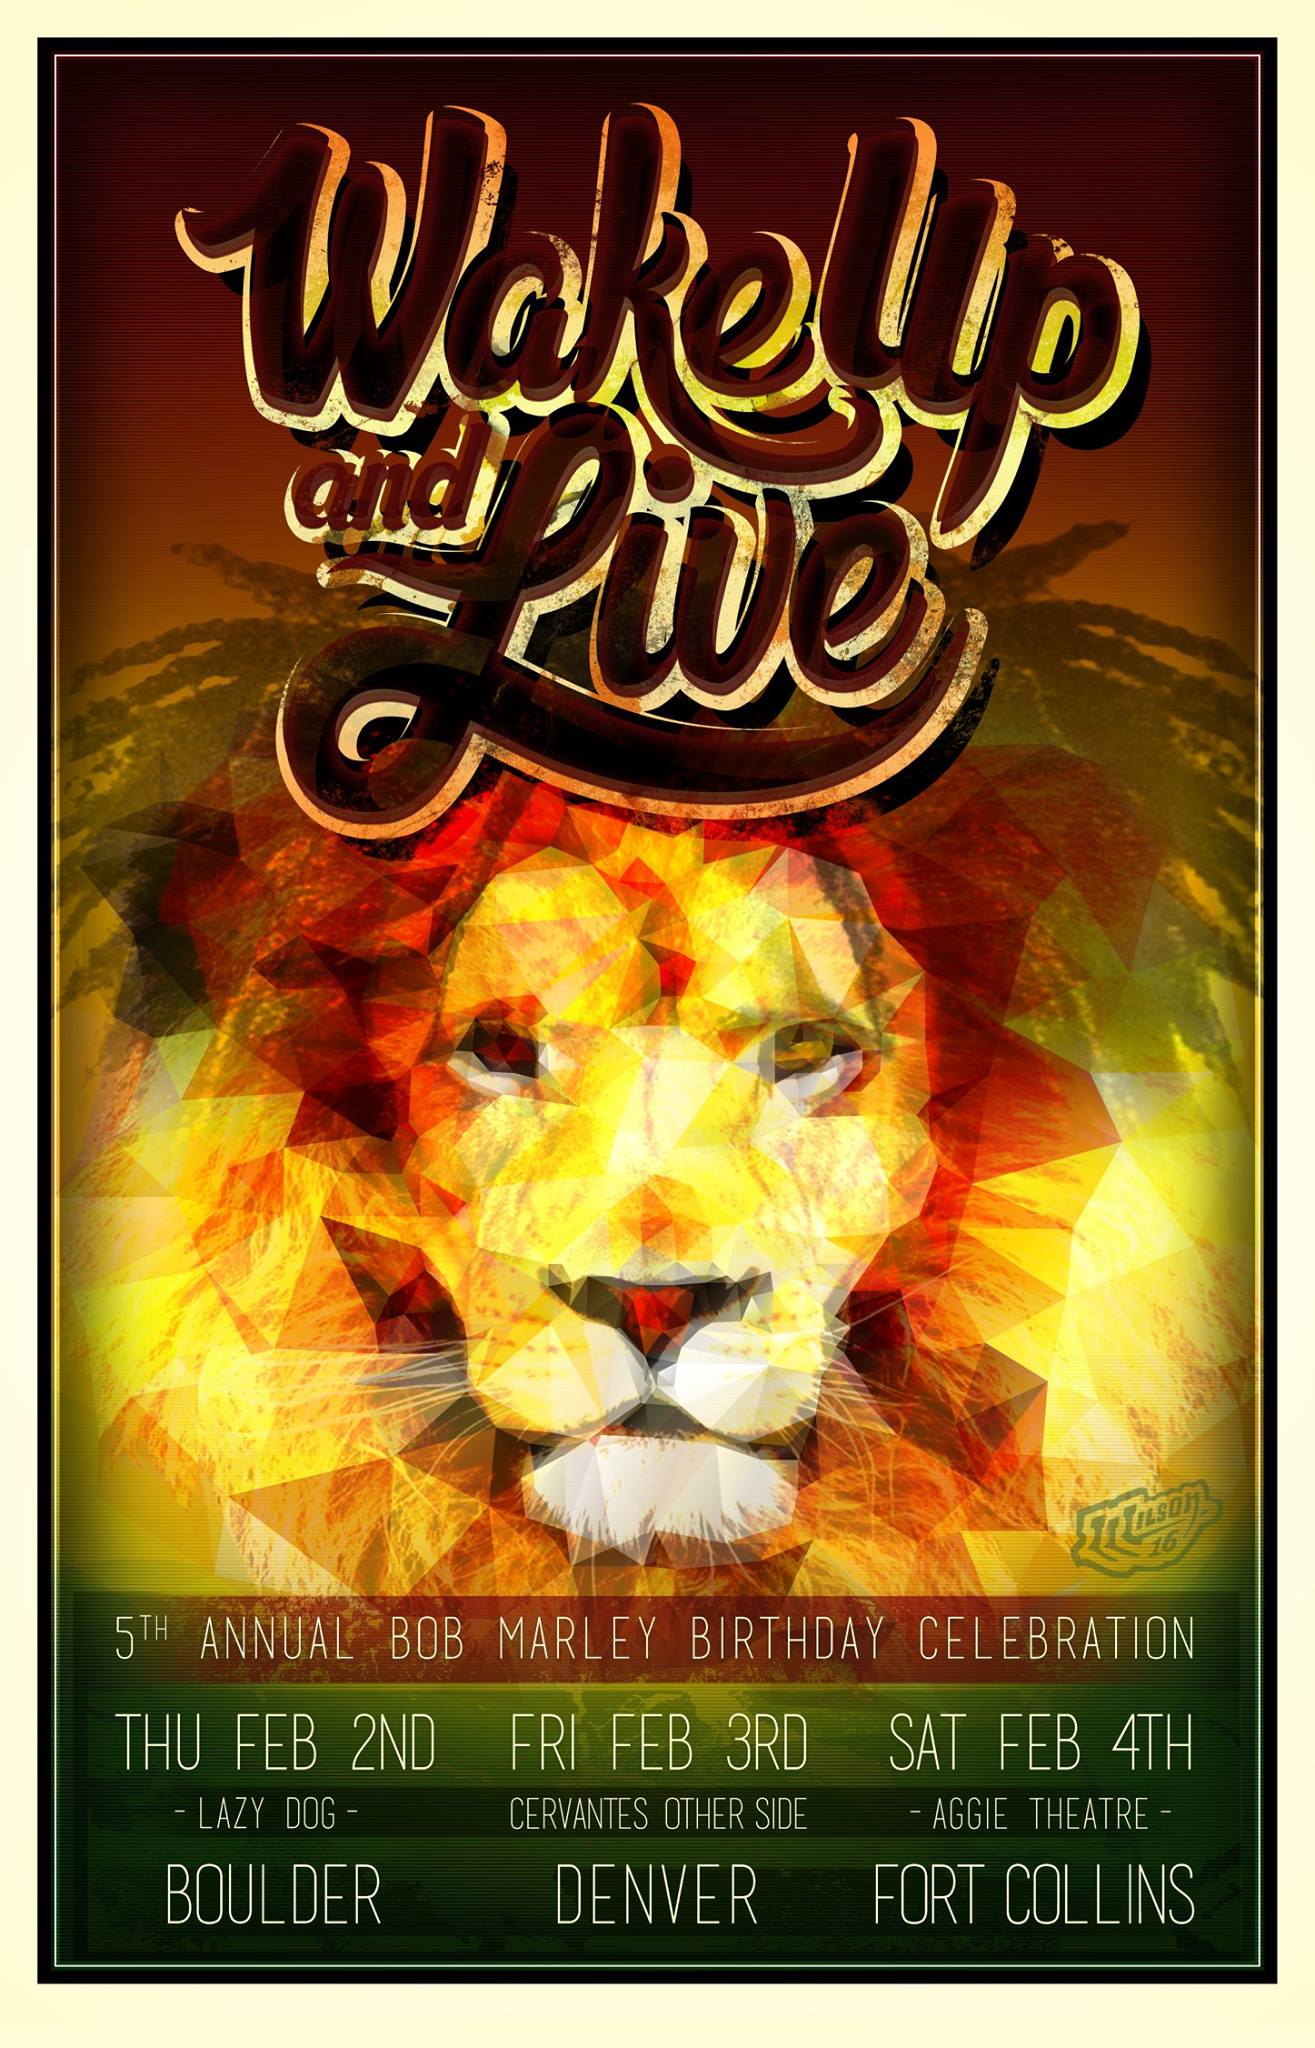 5th Annual Bob Marley Birthday Celebration with Wake Up and Live